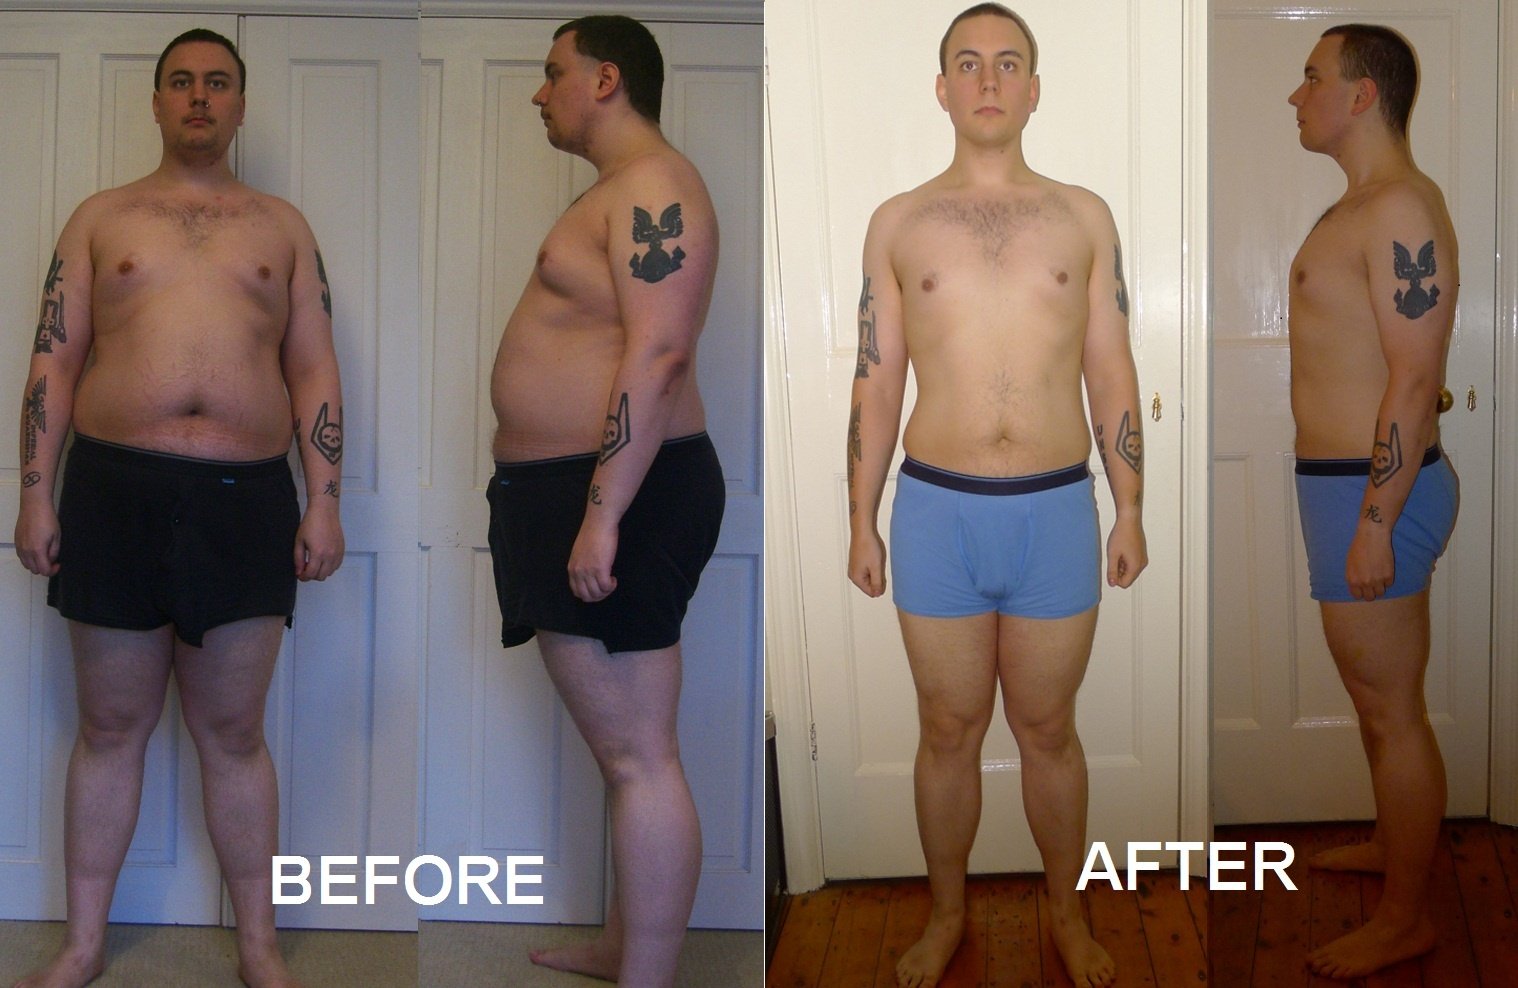 Meet Jake, a 24 year old Rebel from the UK who lost over 70 pounds (32 kg) ...